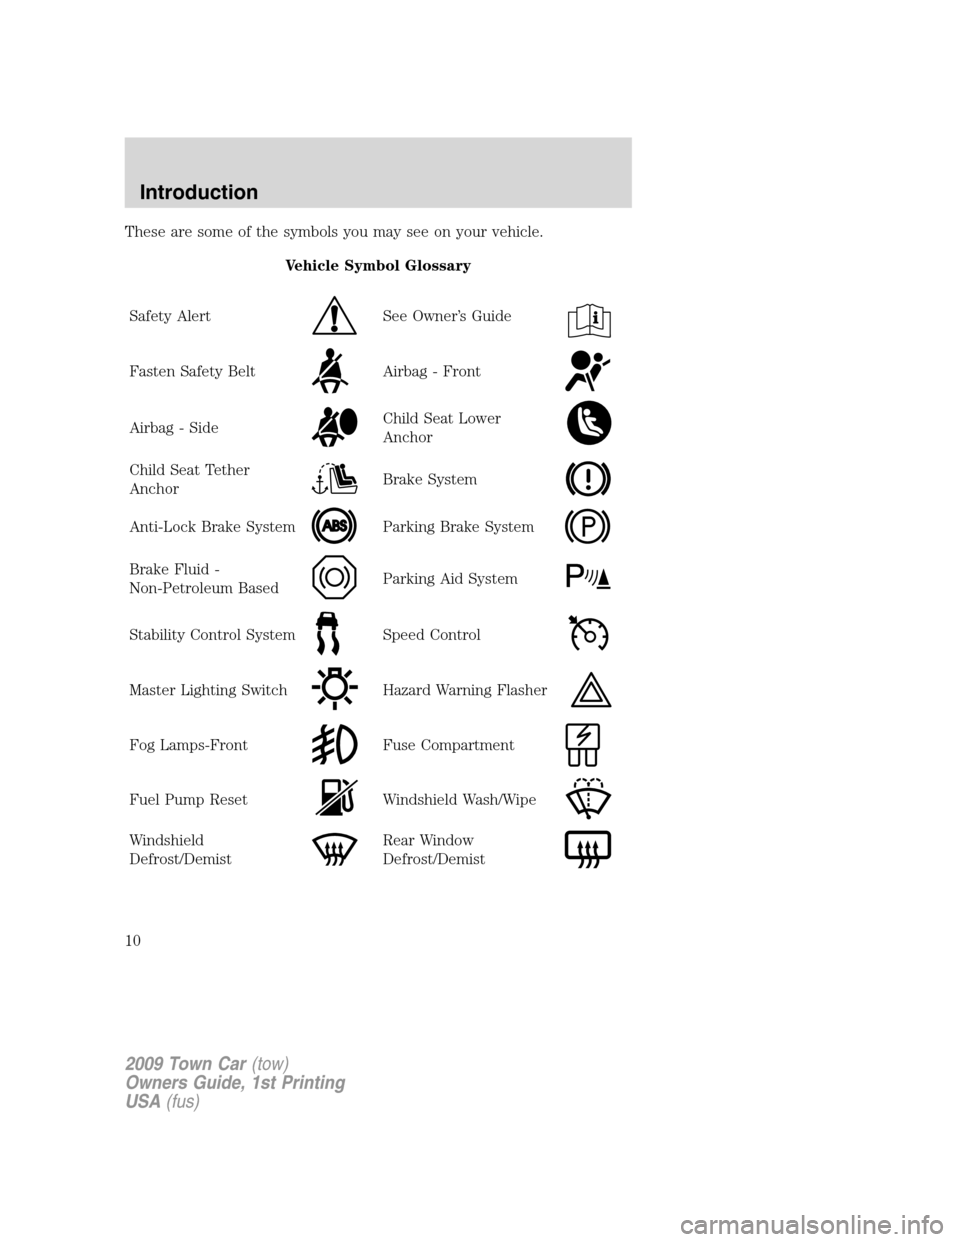 LINCOLN TOWN CAR 2009  Owners Manual These are some of the symbols you may see on your vehicle.
Vehicle Symbol Glossary
Safety Alert
See Owner’s Guide
Fasten Safety BeltAirbag - Front
Airbag - SideChild Seat Lower
Anchor
Child Seat Tet